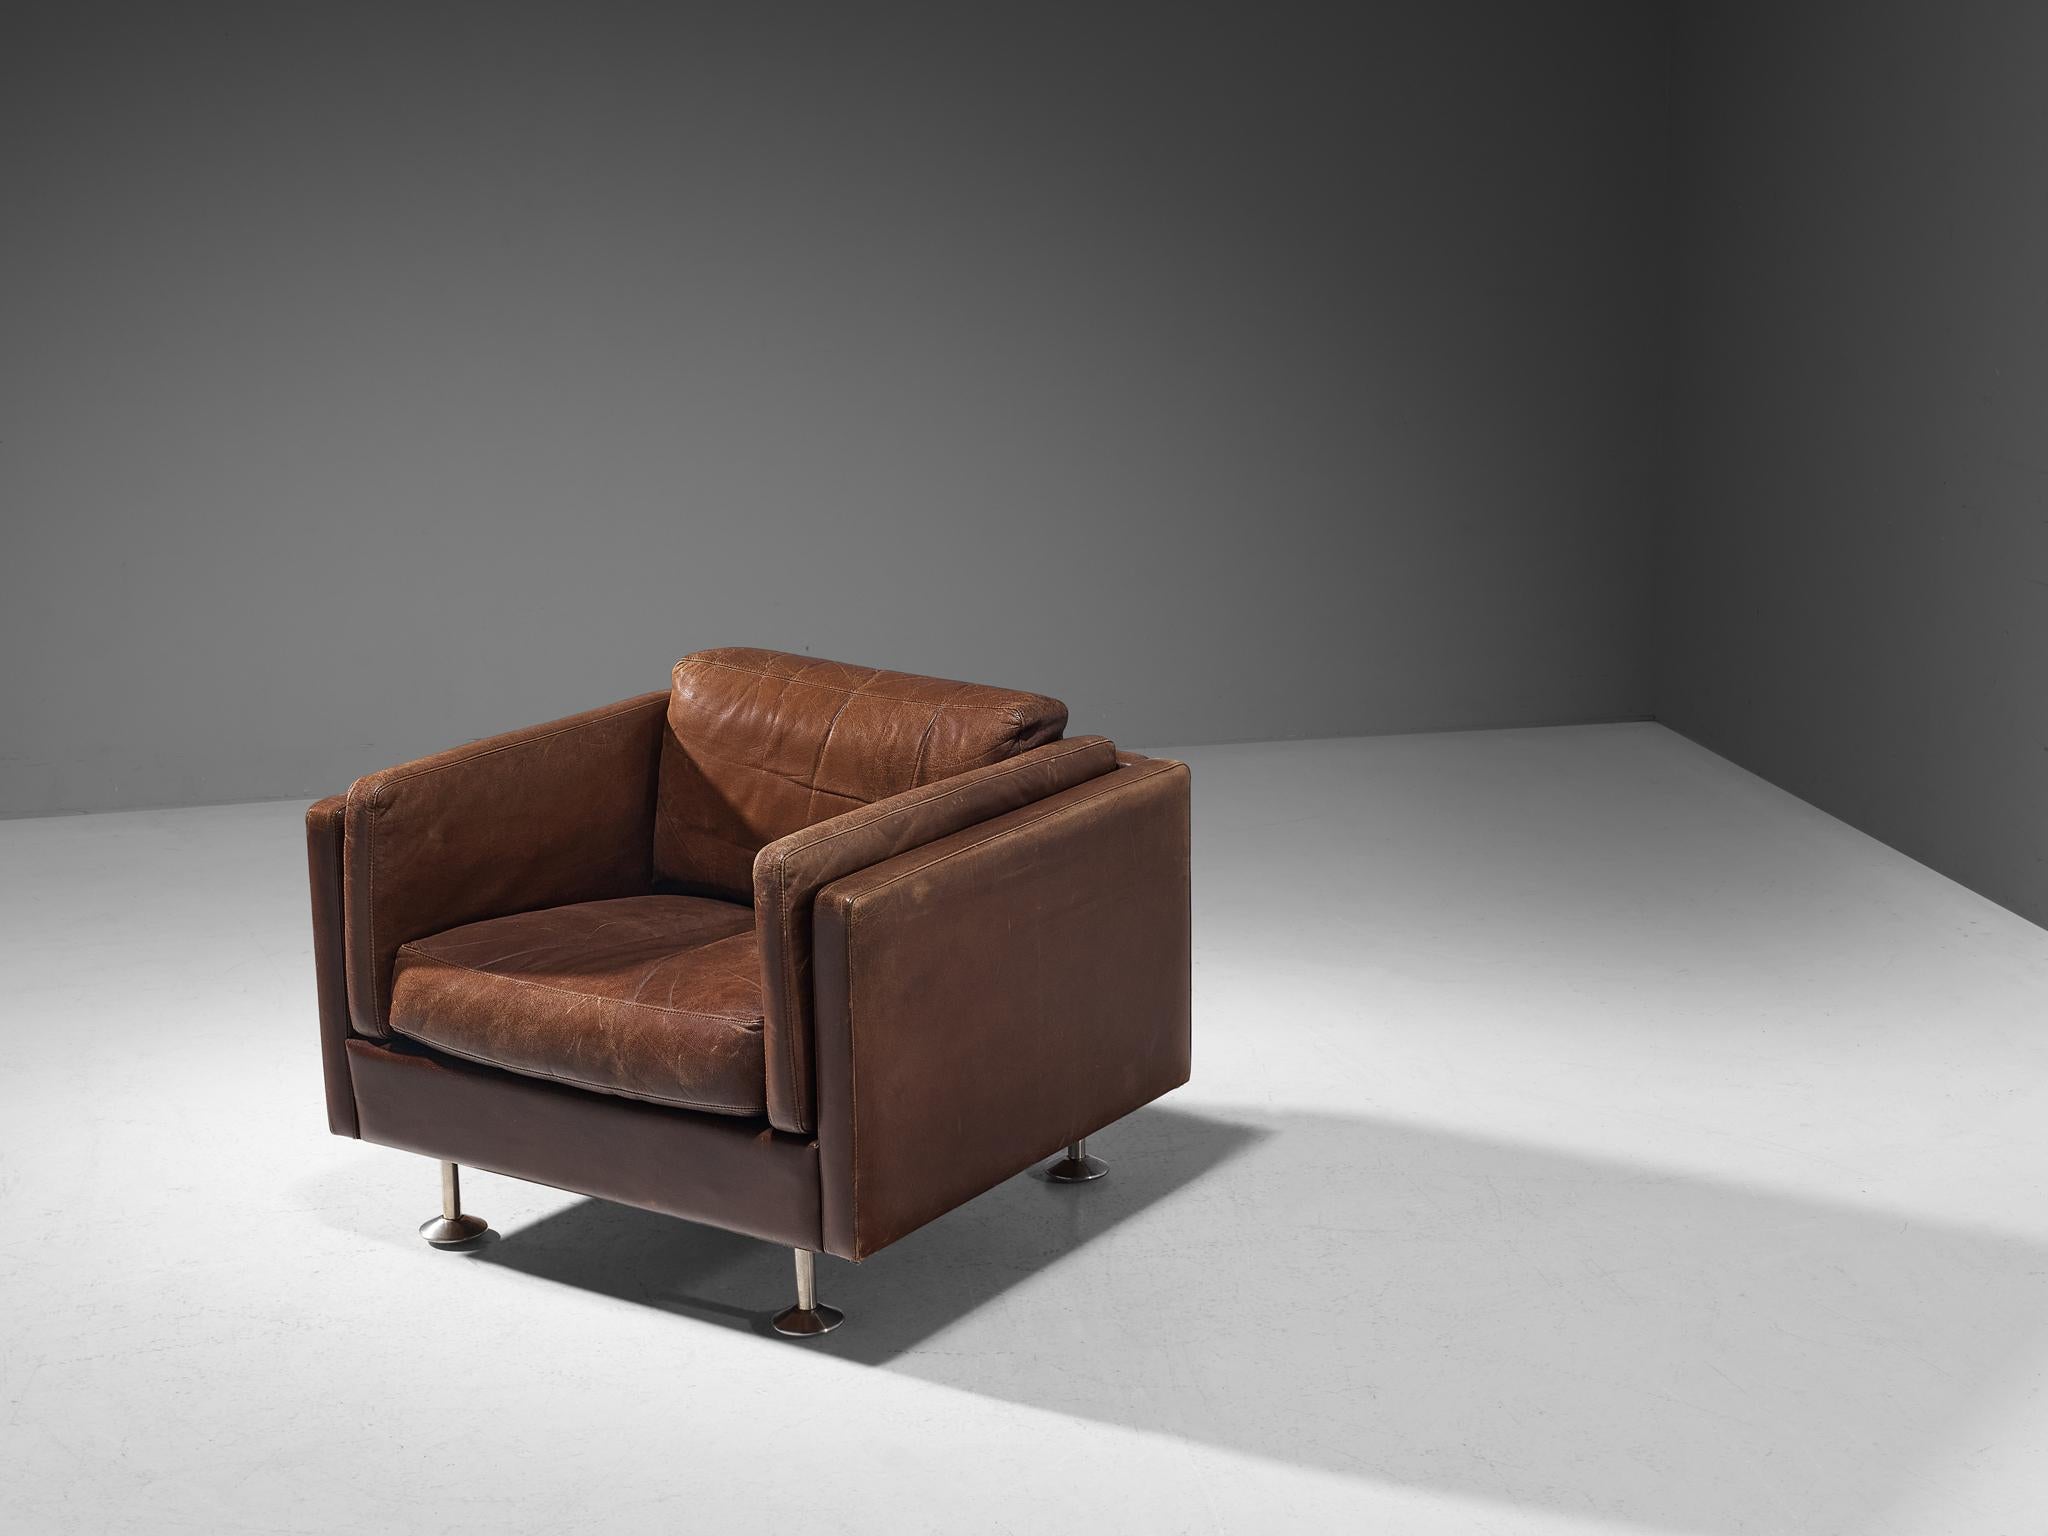 Illum Wikkelsø, lounge chair, leather, brushed steel, Denmark, 1960s. 

This eccentric club chair is well-executed embodying a solid construction. The seating is characterised by clear lines and right-angled shapes that contribute to the chair's